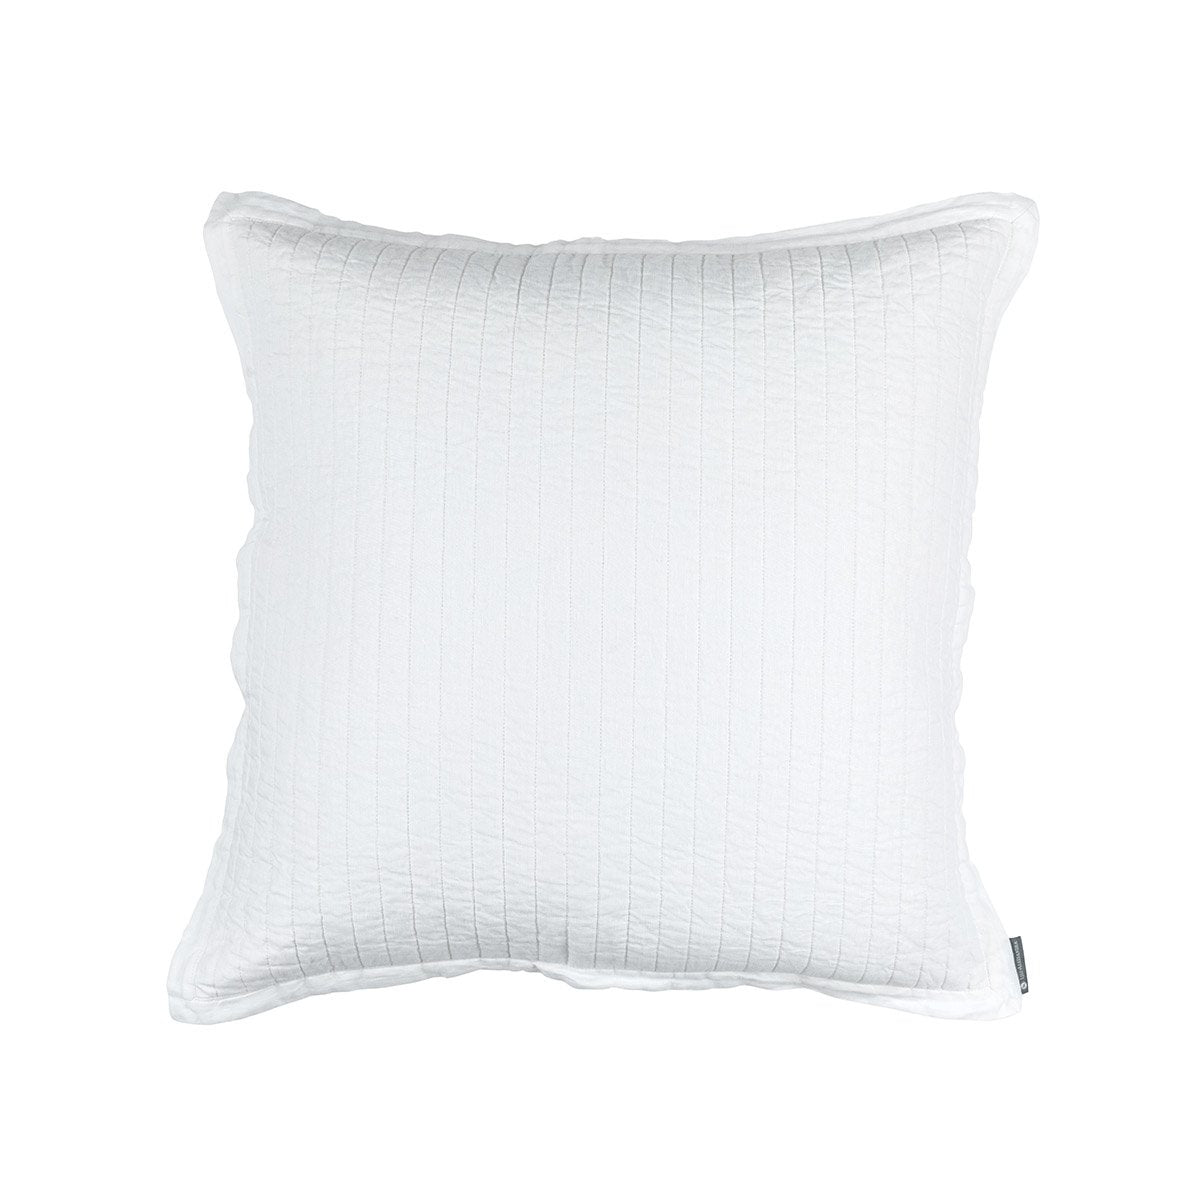 Fig Linens - Lili Alessandra Bedding - Tessa White Quilted Euro Pillow